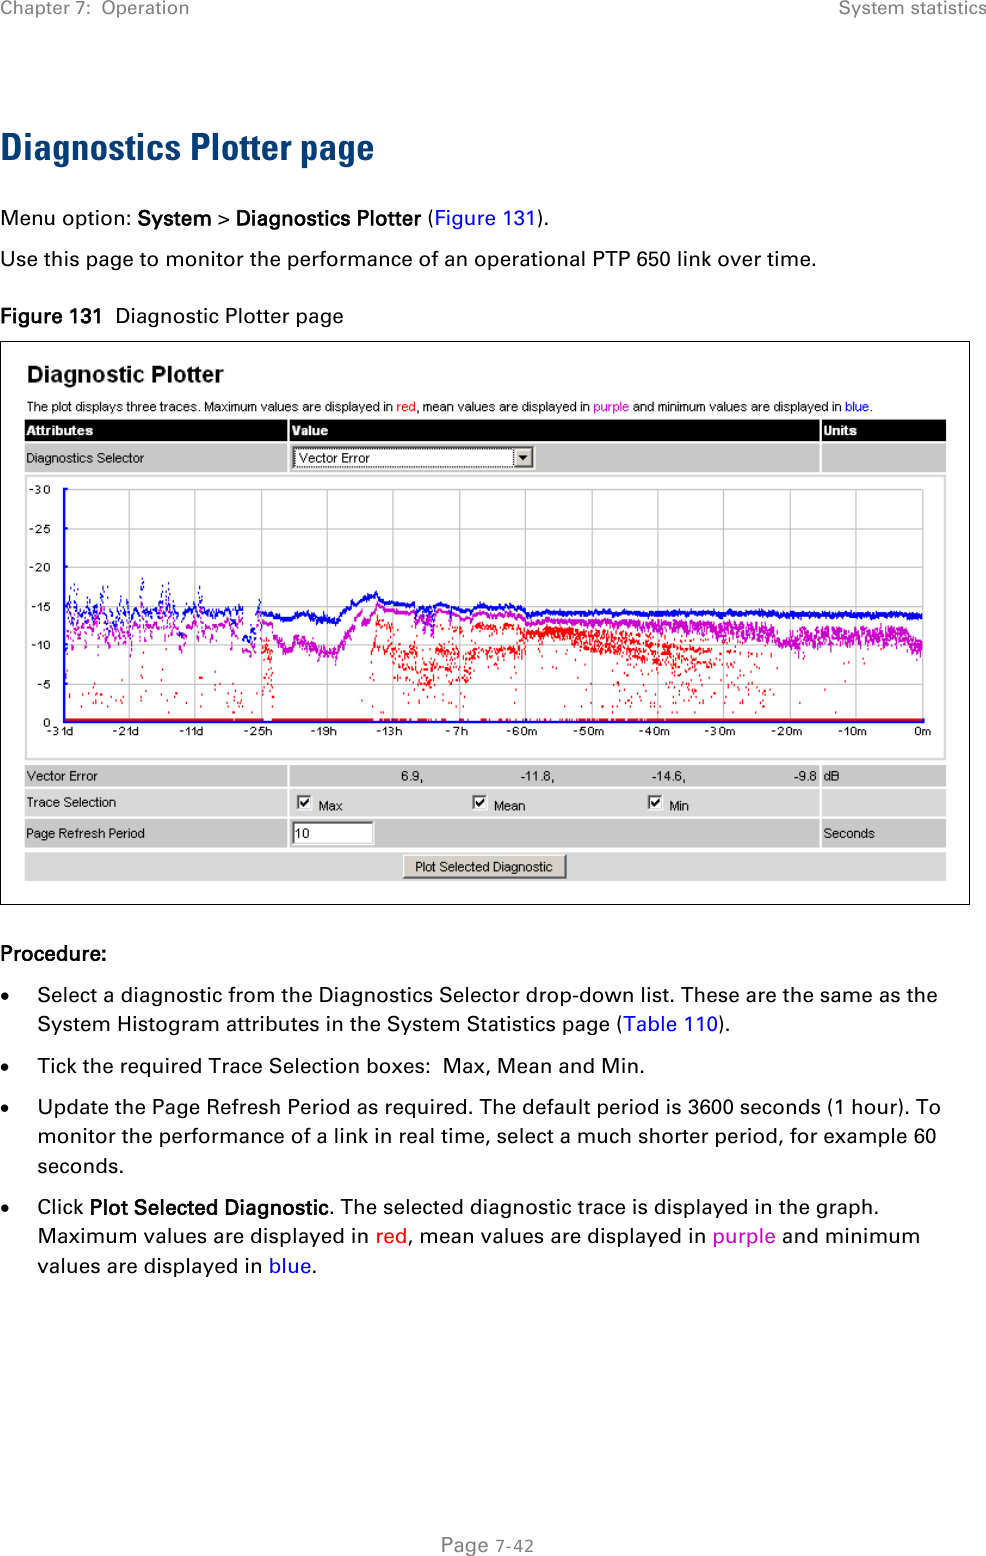 Chapter 7:  Operation System statistics  Diagnostics Plotter page Menu option: System &gt; Diagnostics Plotter (Figure 131). Use this page to monitor the performance of an operational PTP 650 link over time. Figure 131  Diagnostic Plotter page  Procedure: • Select a diagnostic from the Diagnostics Selector drop-down list. These are the same as the System Histogram attributes in the System Statistics page (Table 110). • Tick the required Trace Selection boxes:  Max, Mean and Min. • Update the Page Refresh Period as required. The default period is 3600 seconds (1 hour). To monitor the performance of a link in real time, select a much shorter period, for example 60 seconds. • Click Plot Selected Diagnostic. The selected diagnostic trace is displayed in the graph. Maximum values are displayed in red, mean values are displayed in purple and minimum values are displayed in blue.    Page 7-42 